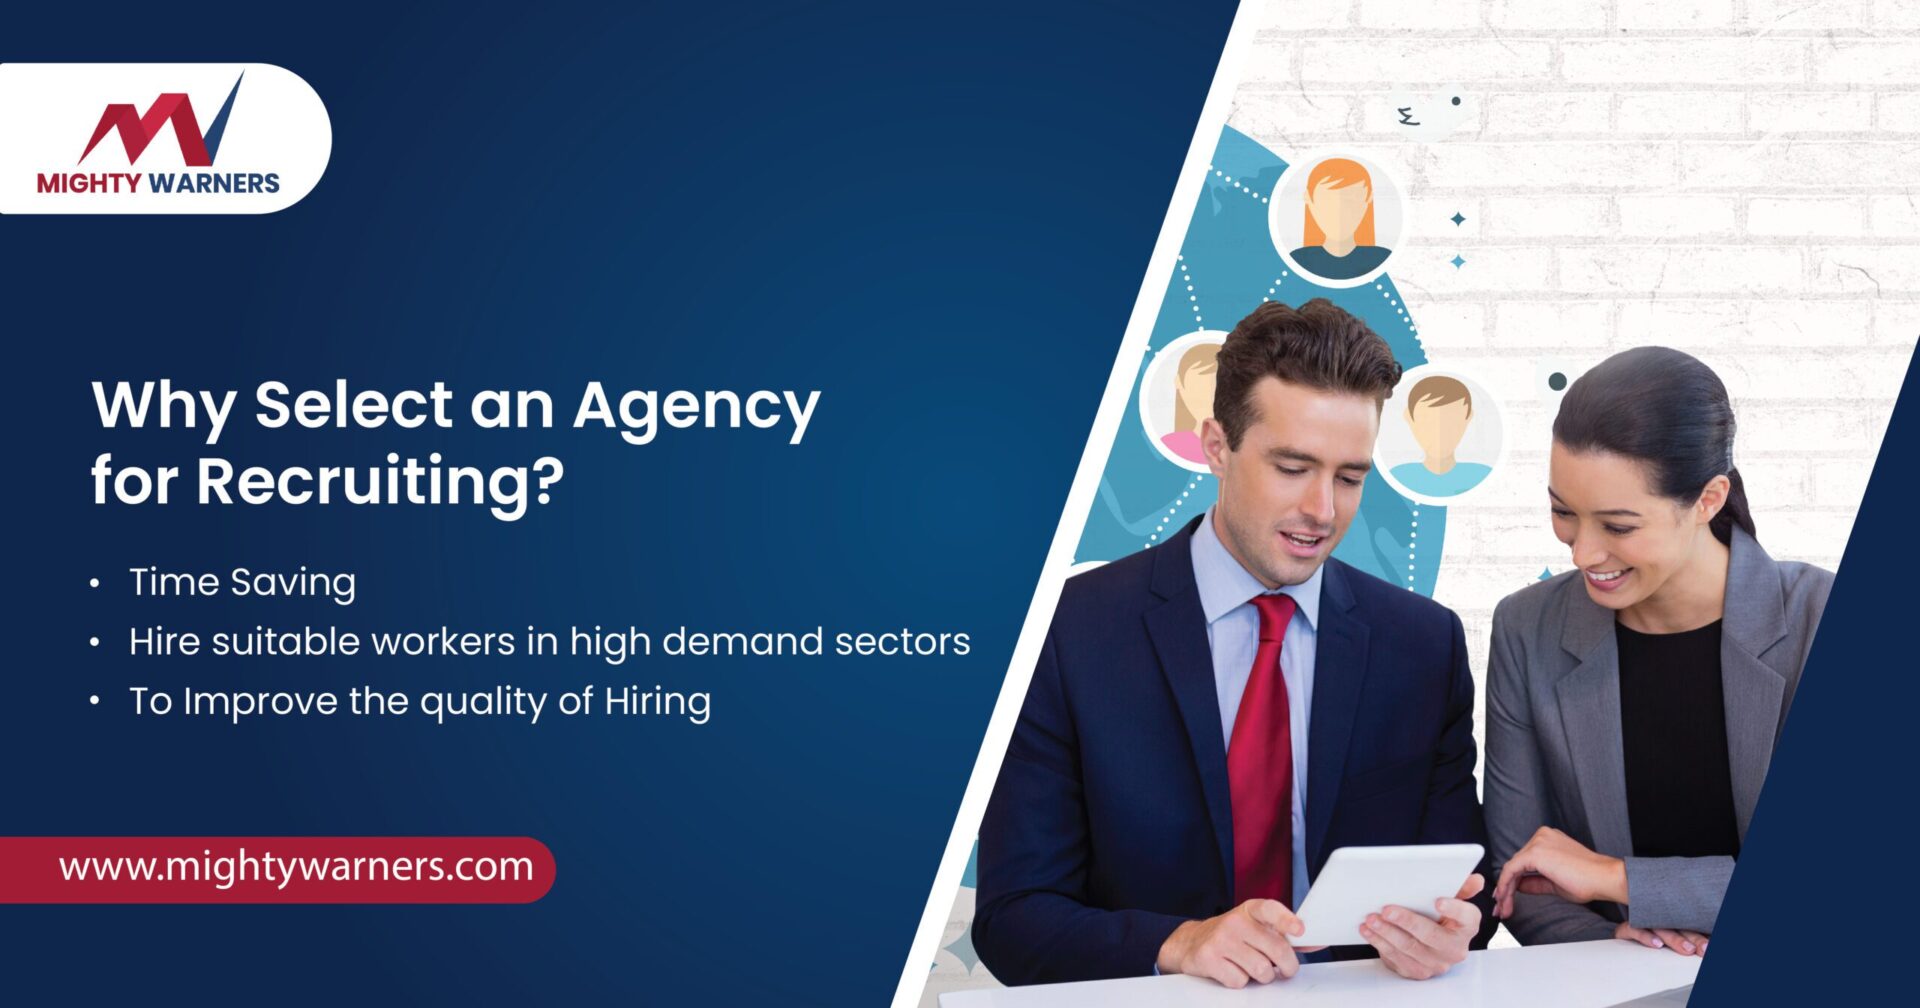 Why Select an Agency for Recruiting